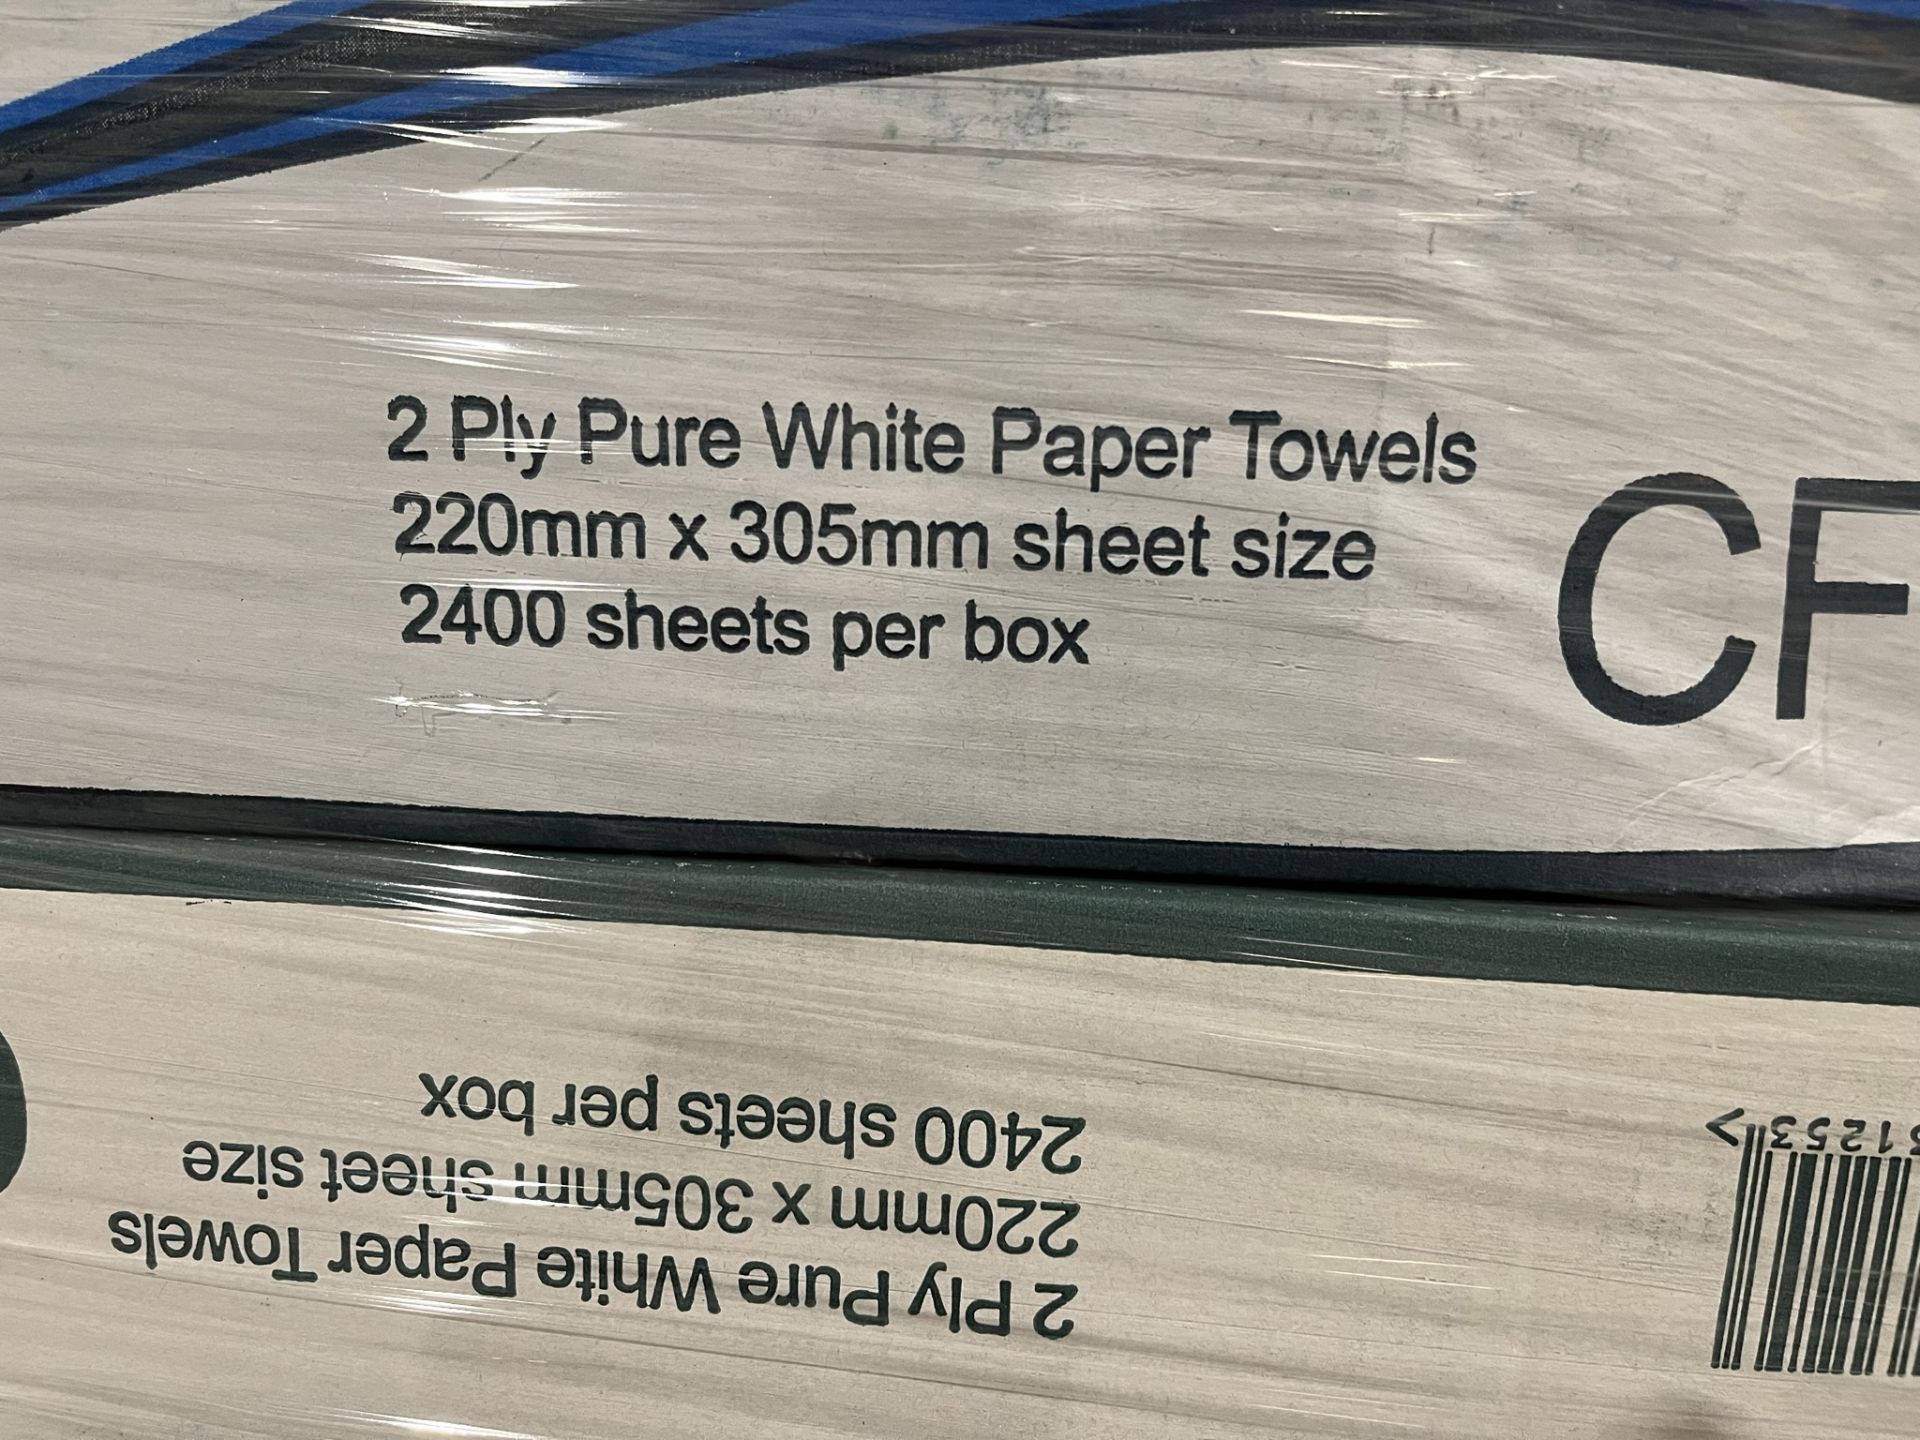 51 x Boxes Of Sirius 2 Ply Pure White Paper Towels - Image 8 of 8